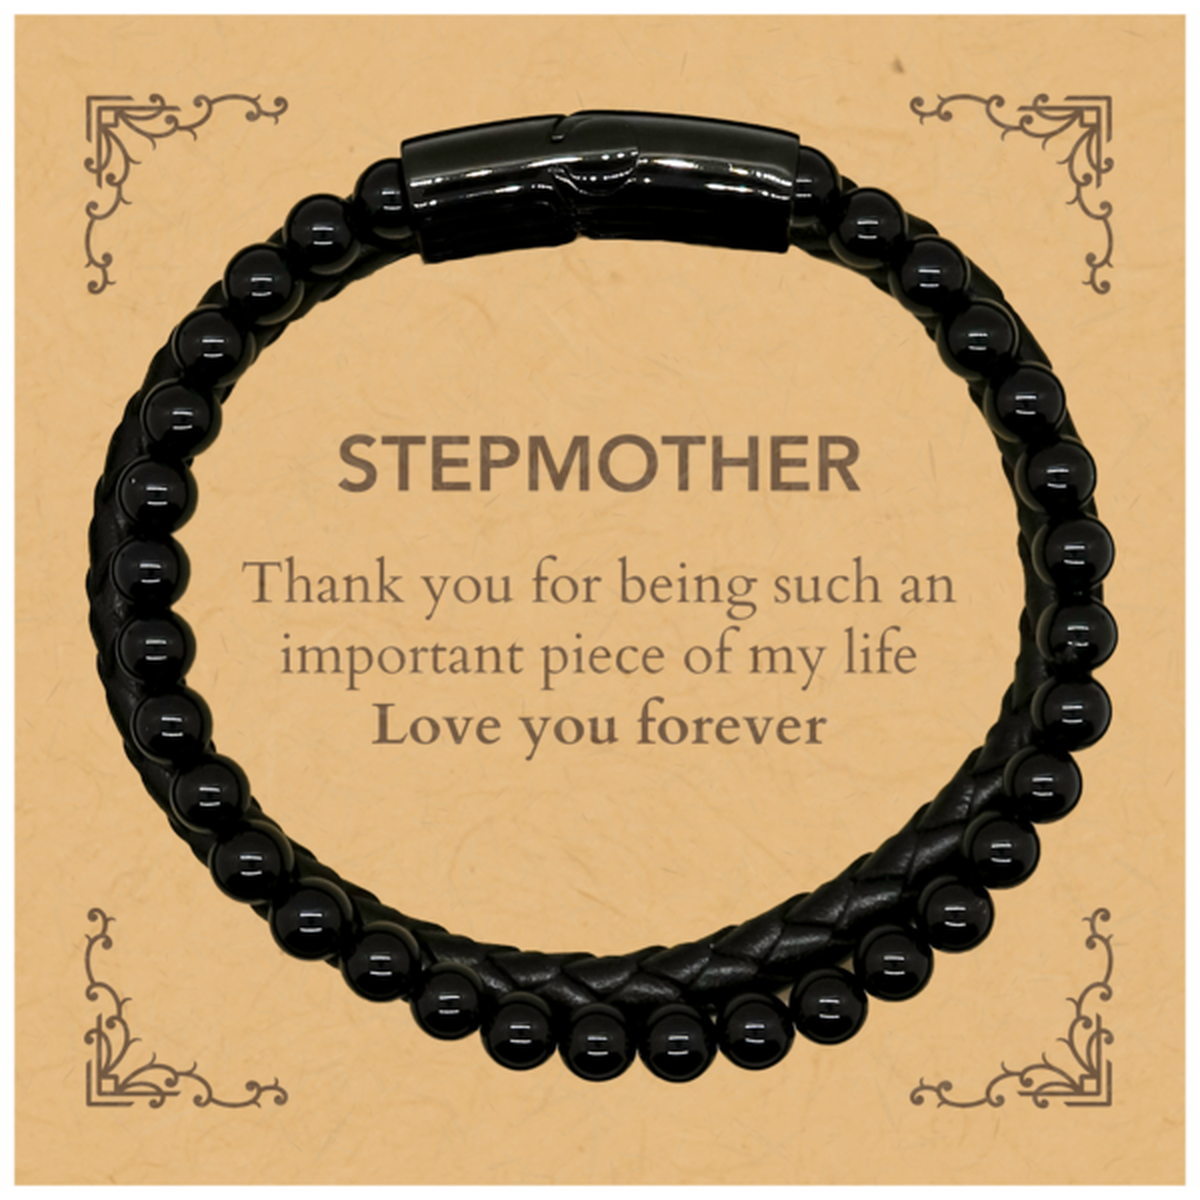 Appropriate Stepmother Stone Leather Bracelets Epic Birthday Gifts for Stepmother Thank you for being such an important piece of my life Stepmother Christmas Mothers Fathers Day